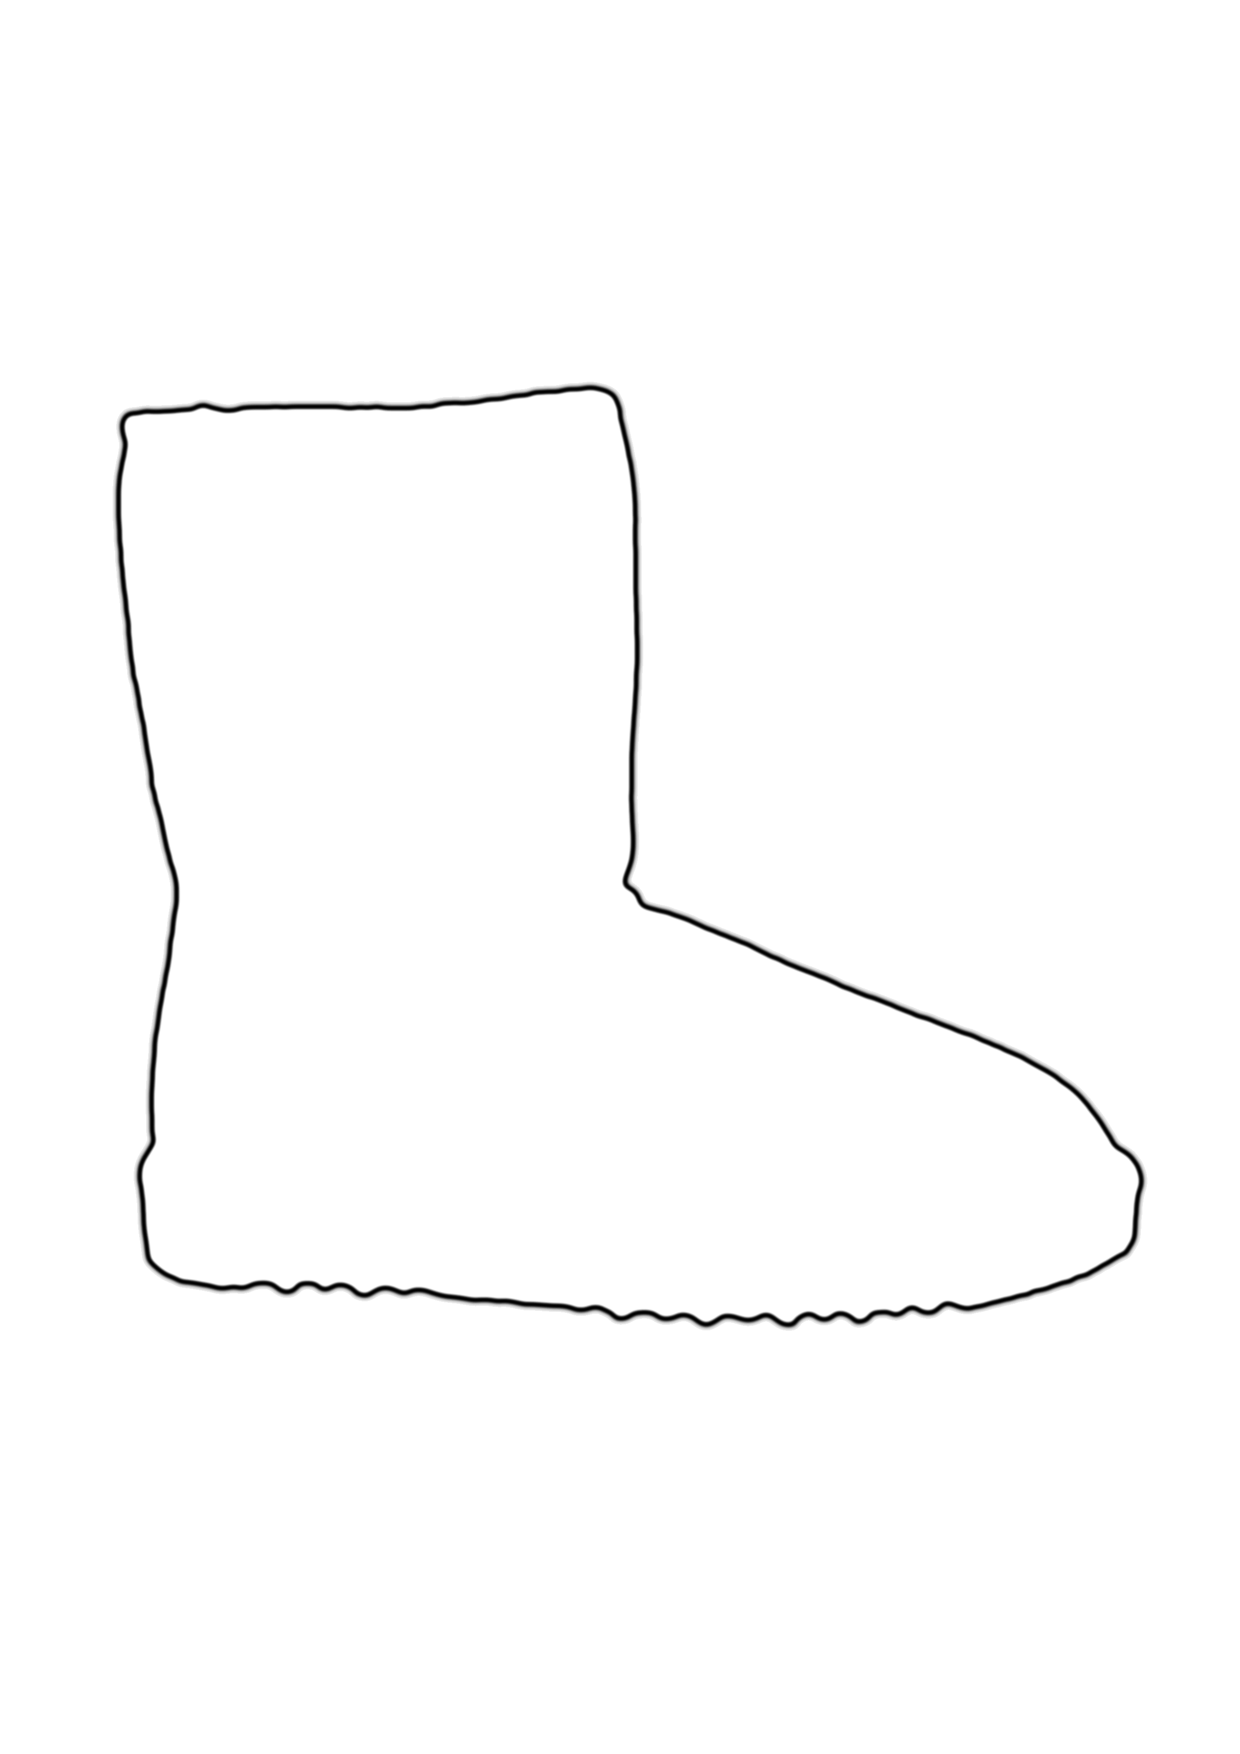 Free Rain Boots Coloring Page Download Free Rain Boots Coloring Page